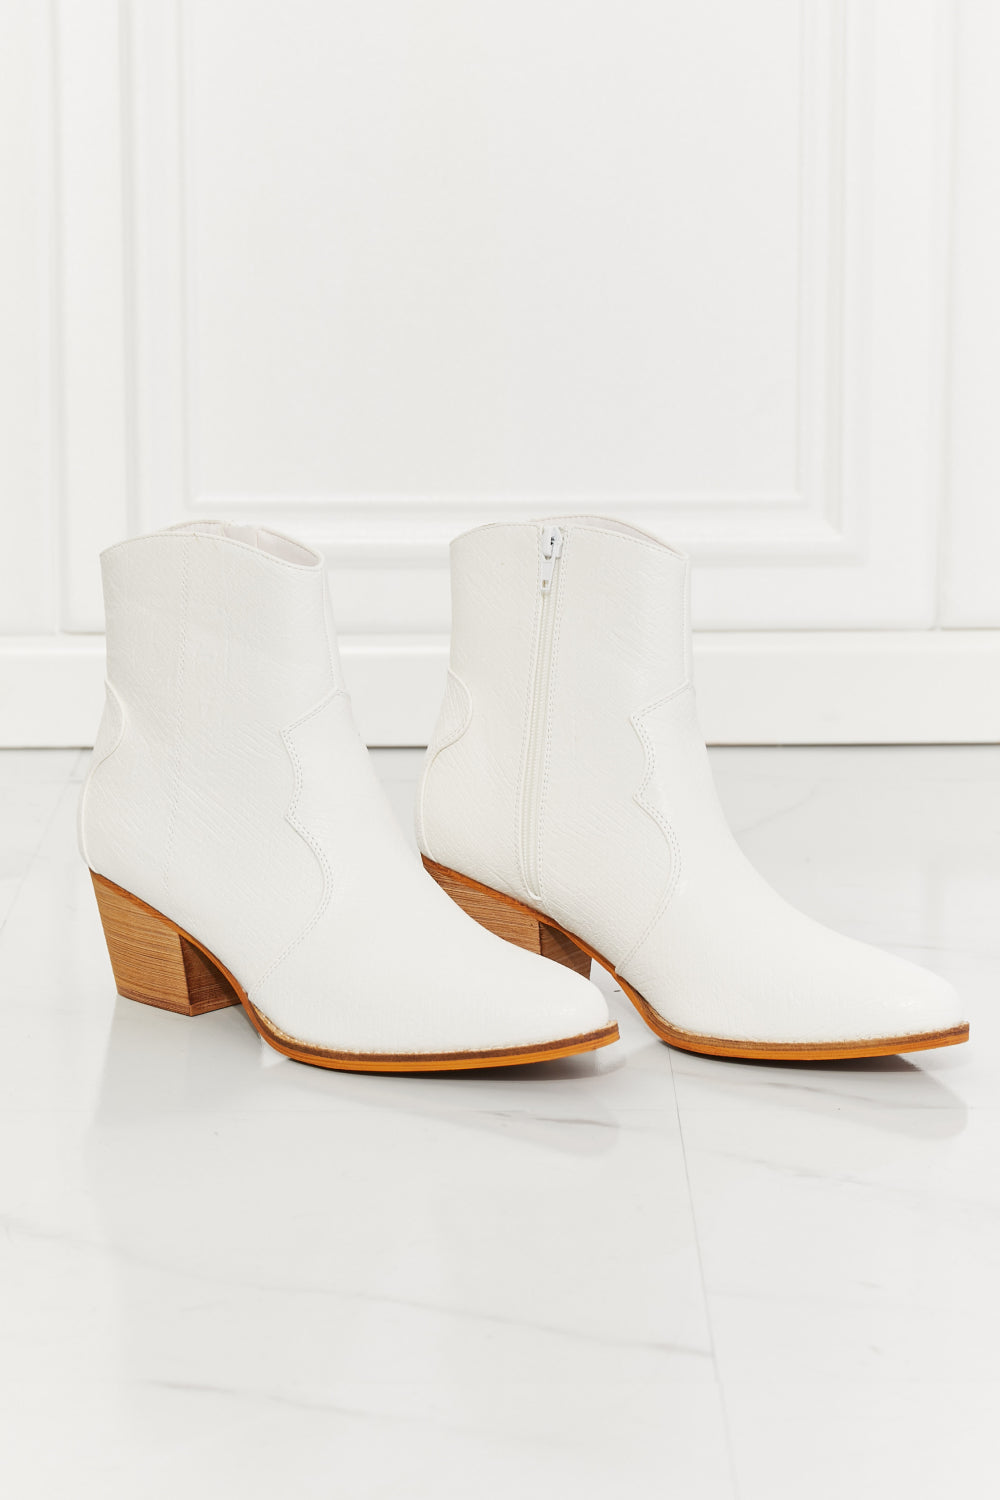 MMShoes Watertower Town Faux Leather Western Ankle Boots in White - Tigbul's Fashion